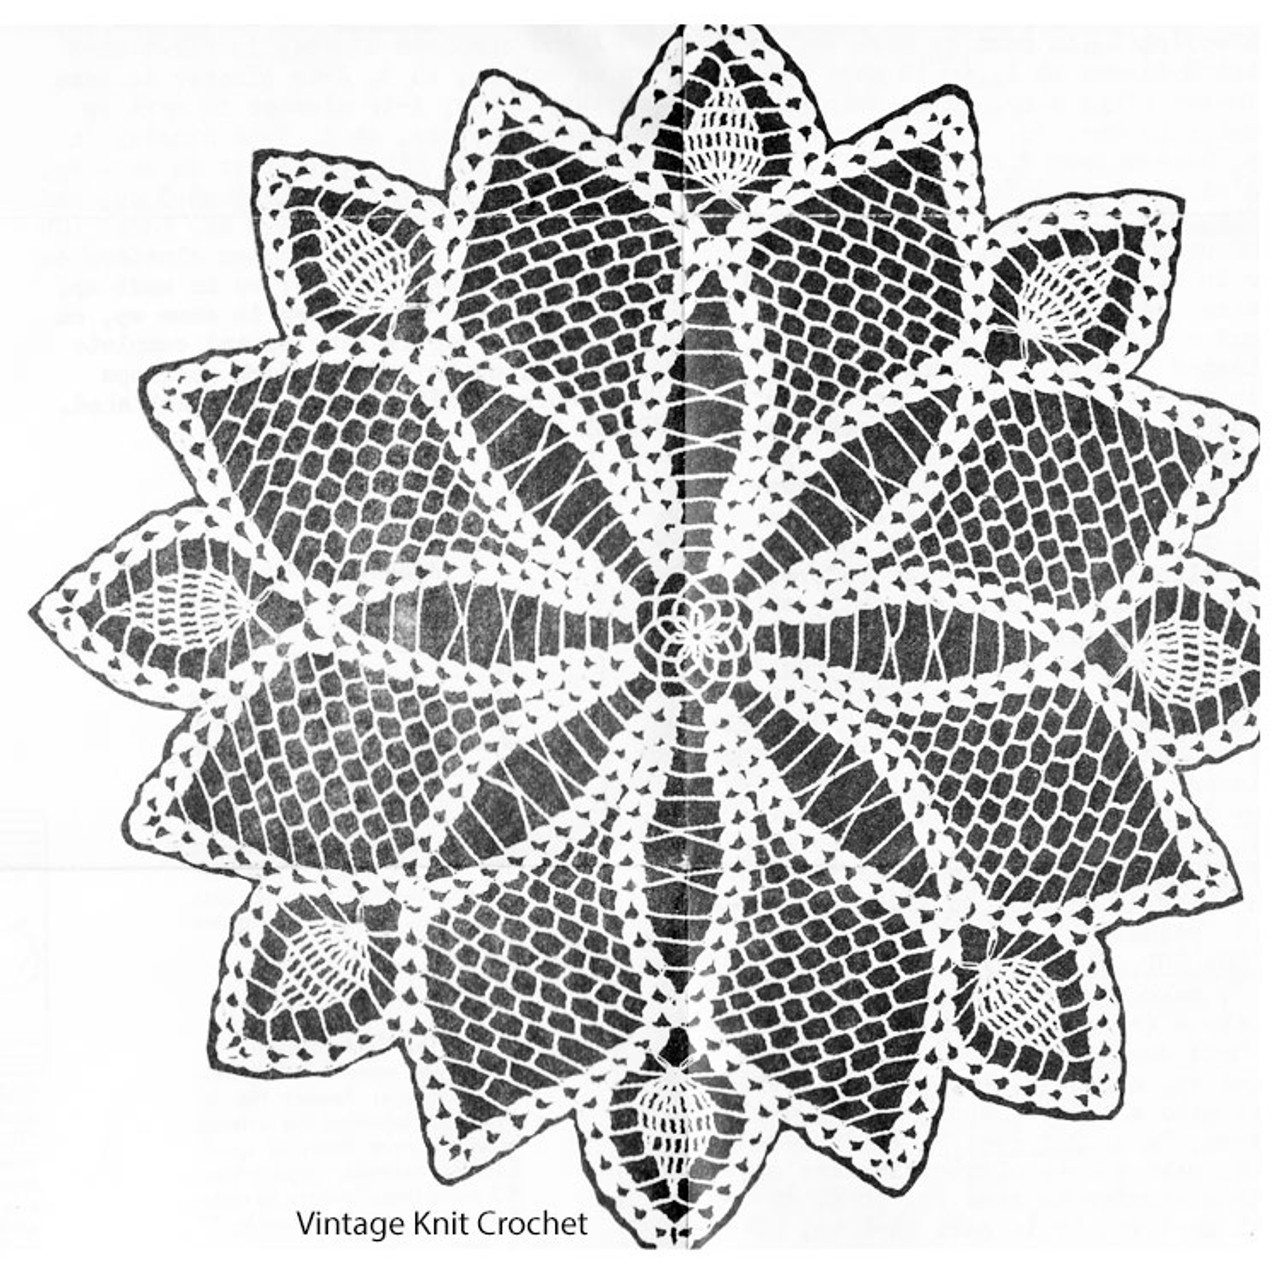 Pineapple crocheted doily pattern, Anne Cabot 5587